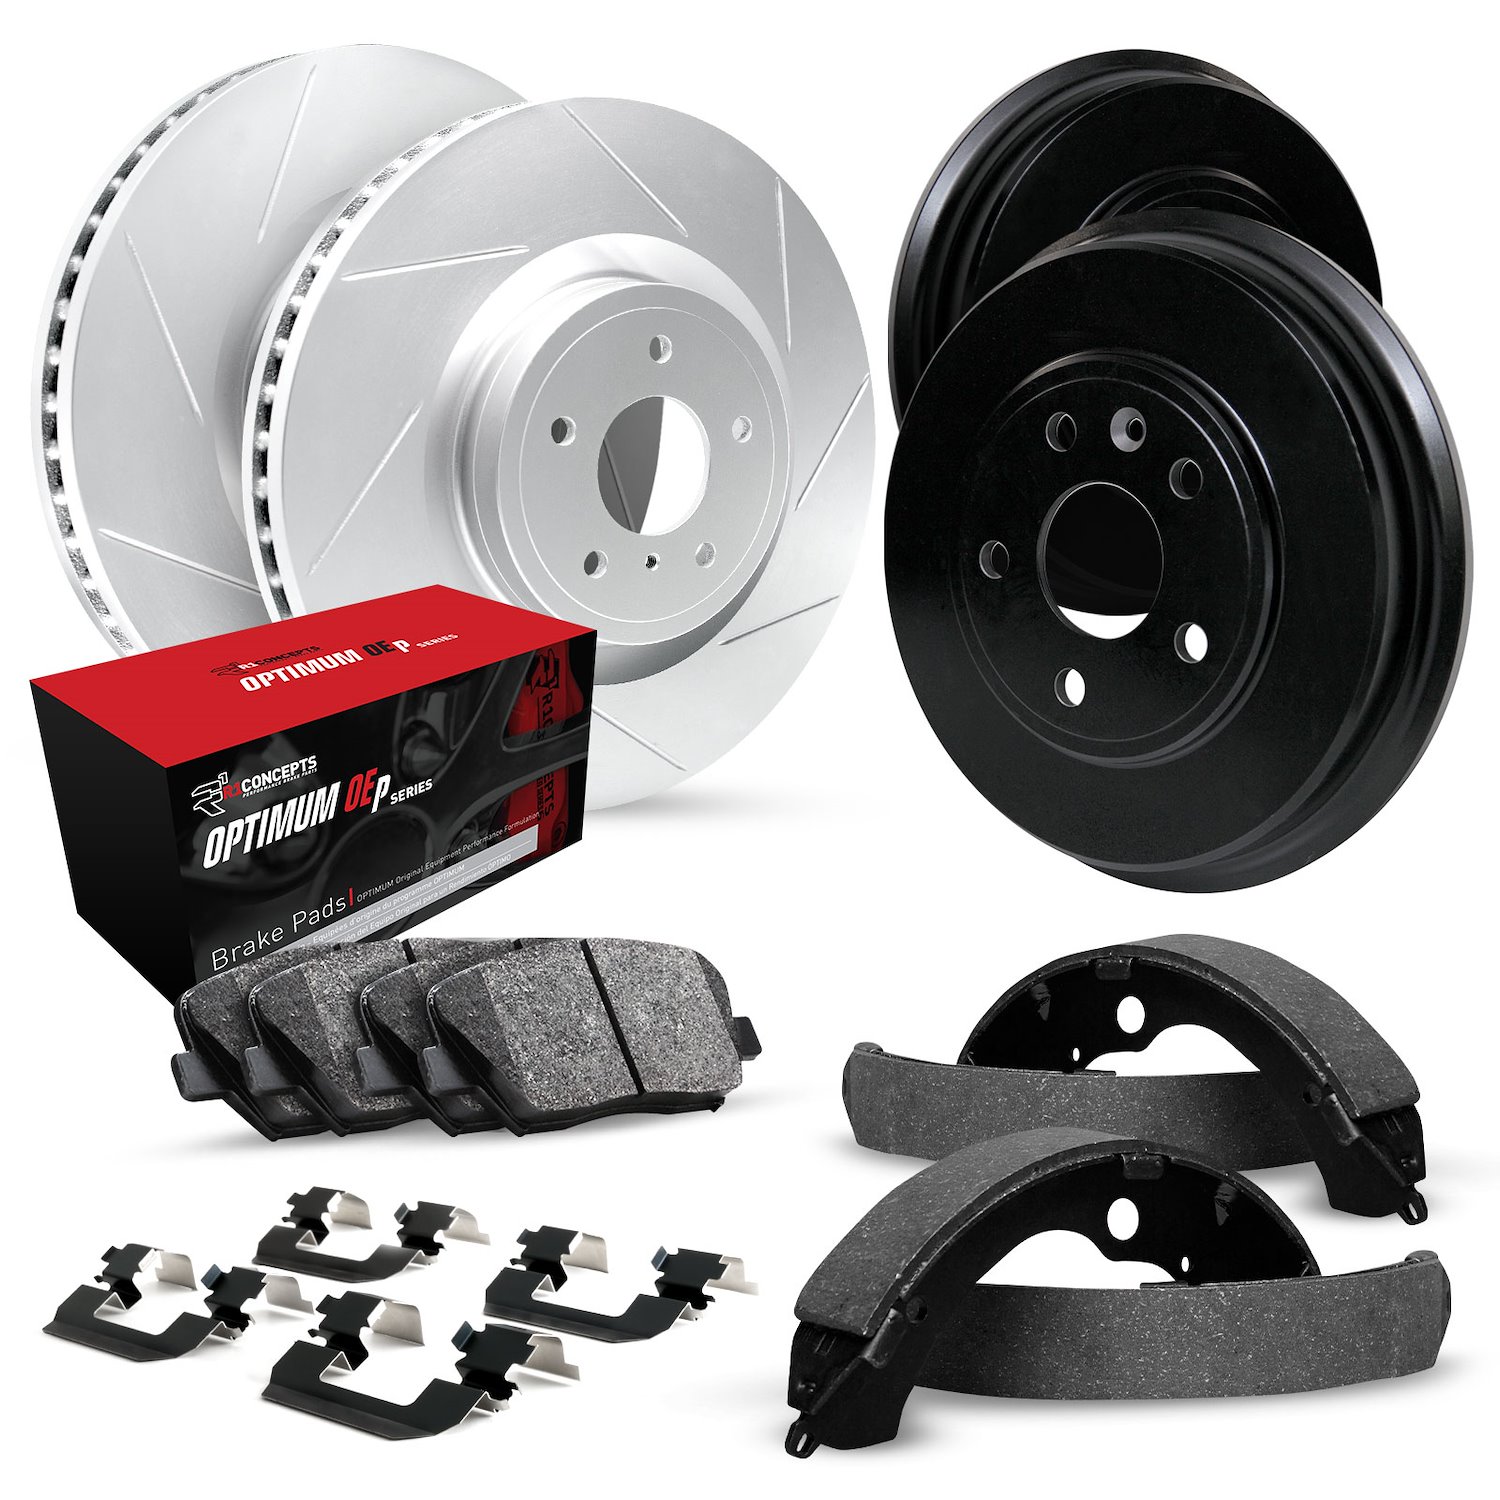 GEO-Carbon Slotted Brake Rotor & Drum Set w/Optimum OE Pads, Shoes, & Hardware, 1971-1976 GM, Position: Front & Rear